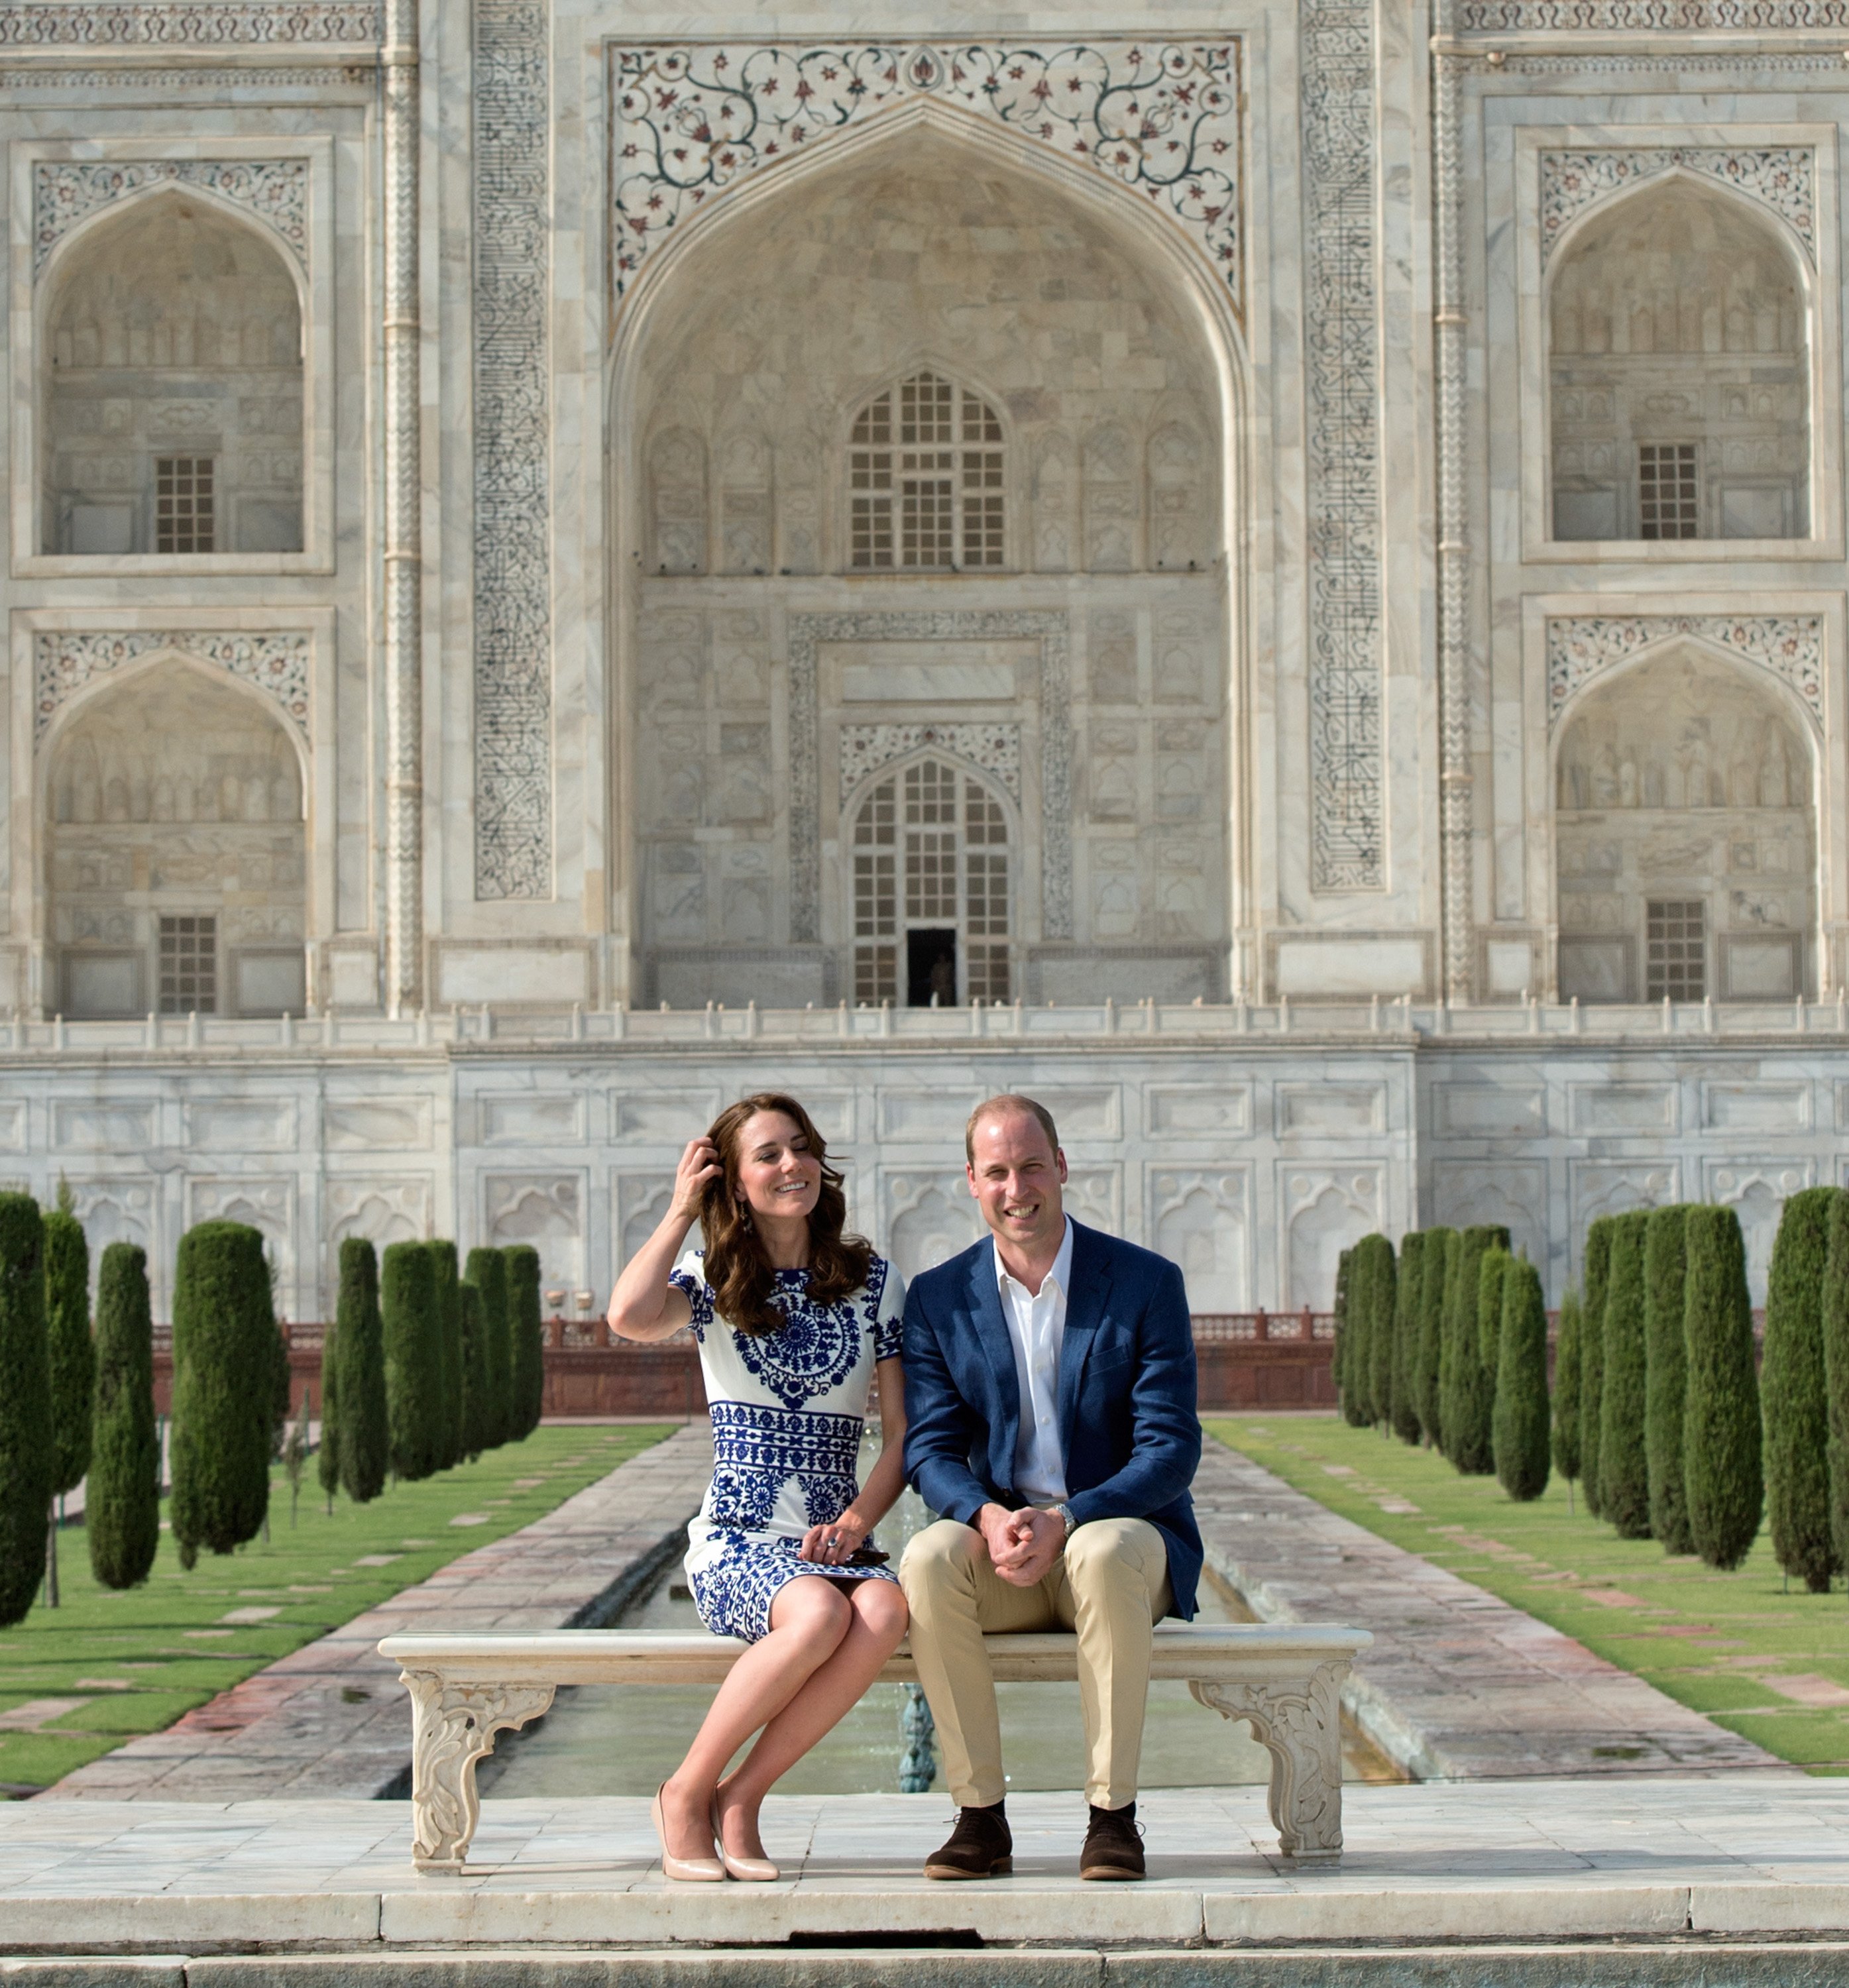 Prince William, Duke of Cambridge and Catherine, Duchess of Cambridge pose in front of the Taj Mahal on April 16, 2016 | Photo: Getty Images